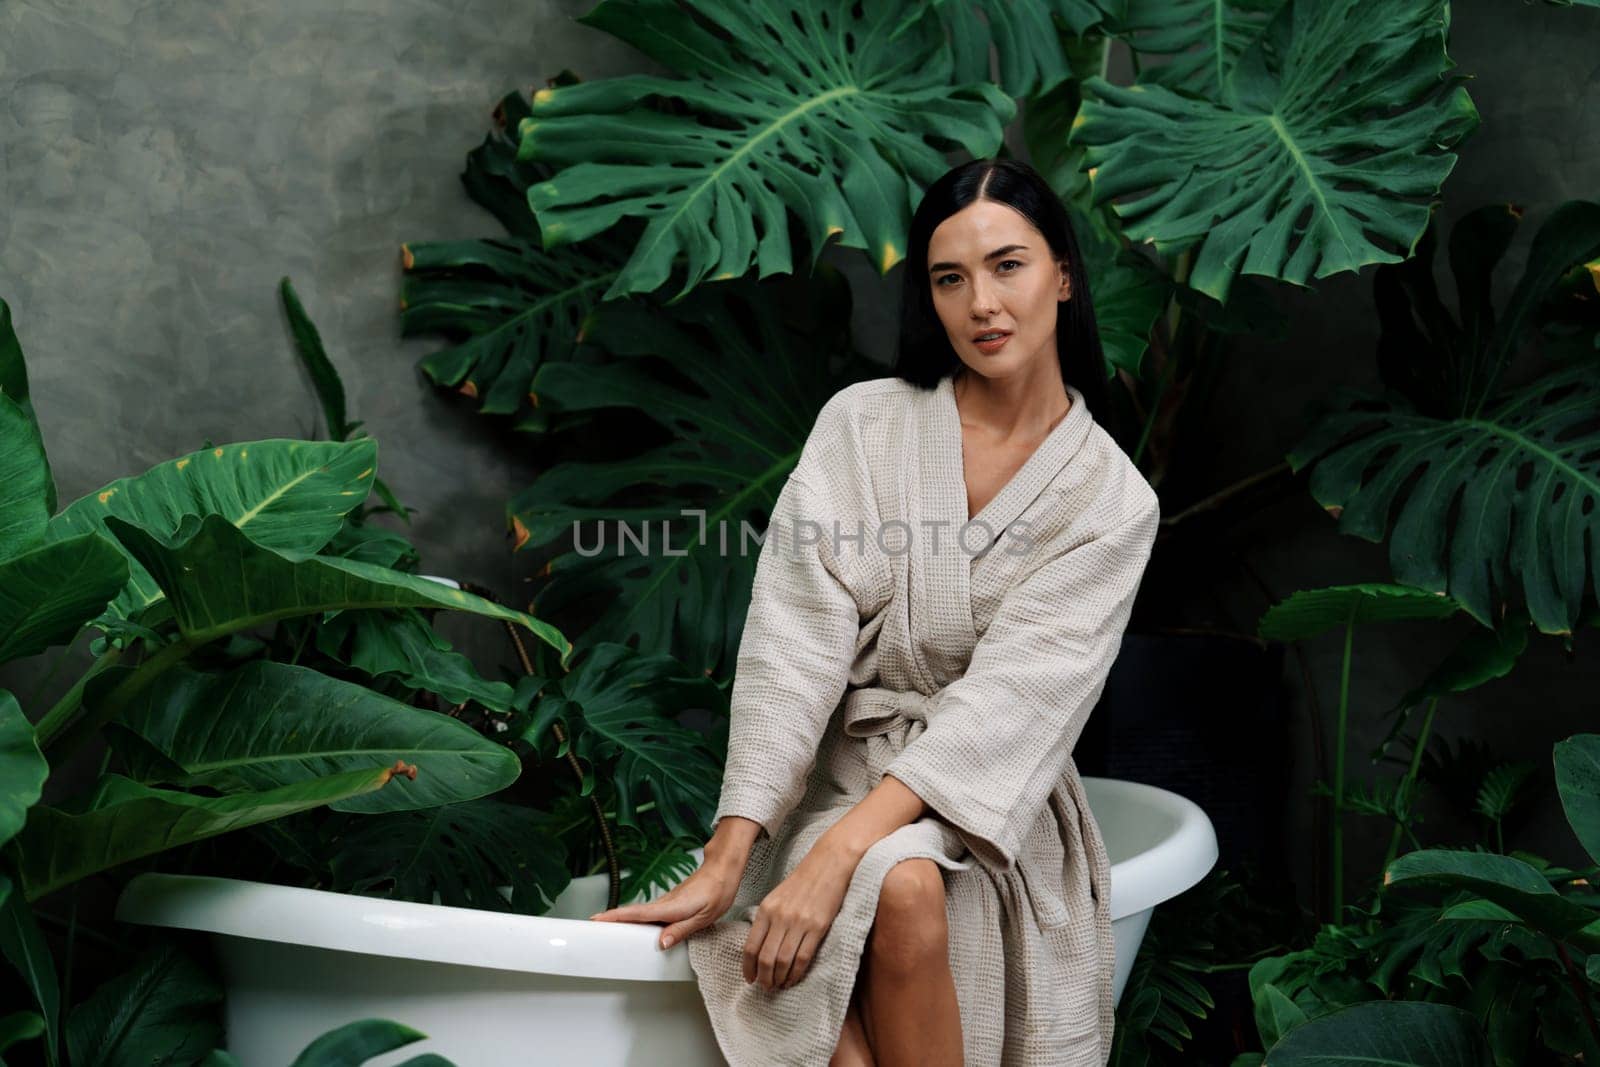 Tropical and exotic spa garden with bathtub in modern hotel or resort with young woman in bathrobe enjoying leisure and wellness lifestyle surrounded by lush greenery foliage background. Blithe